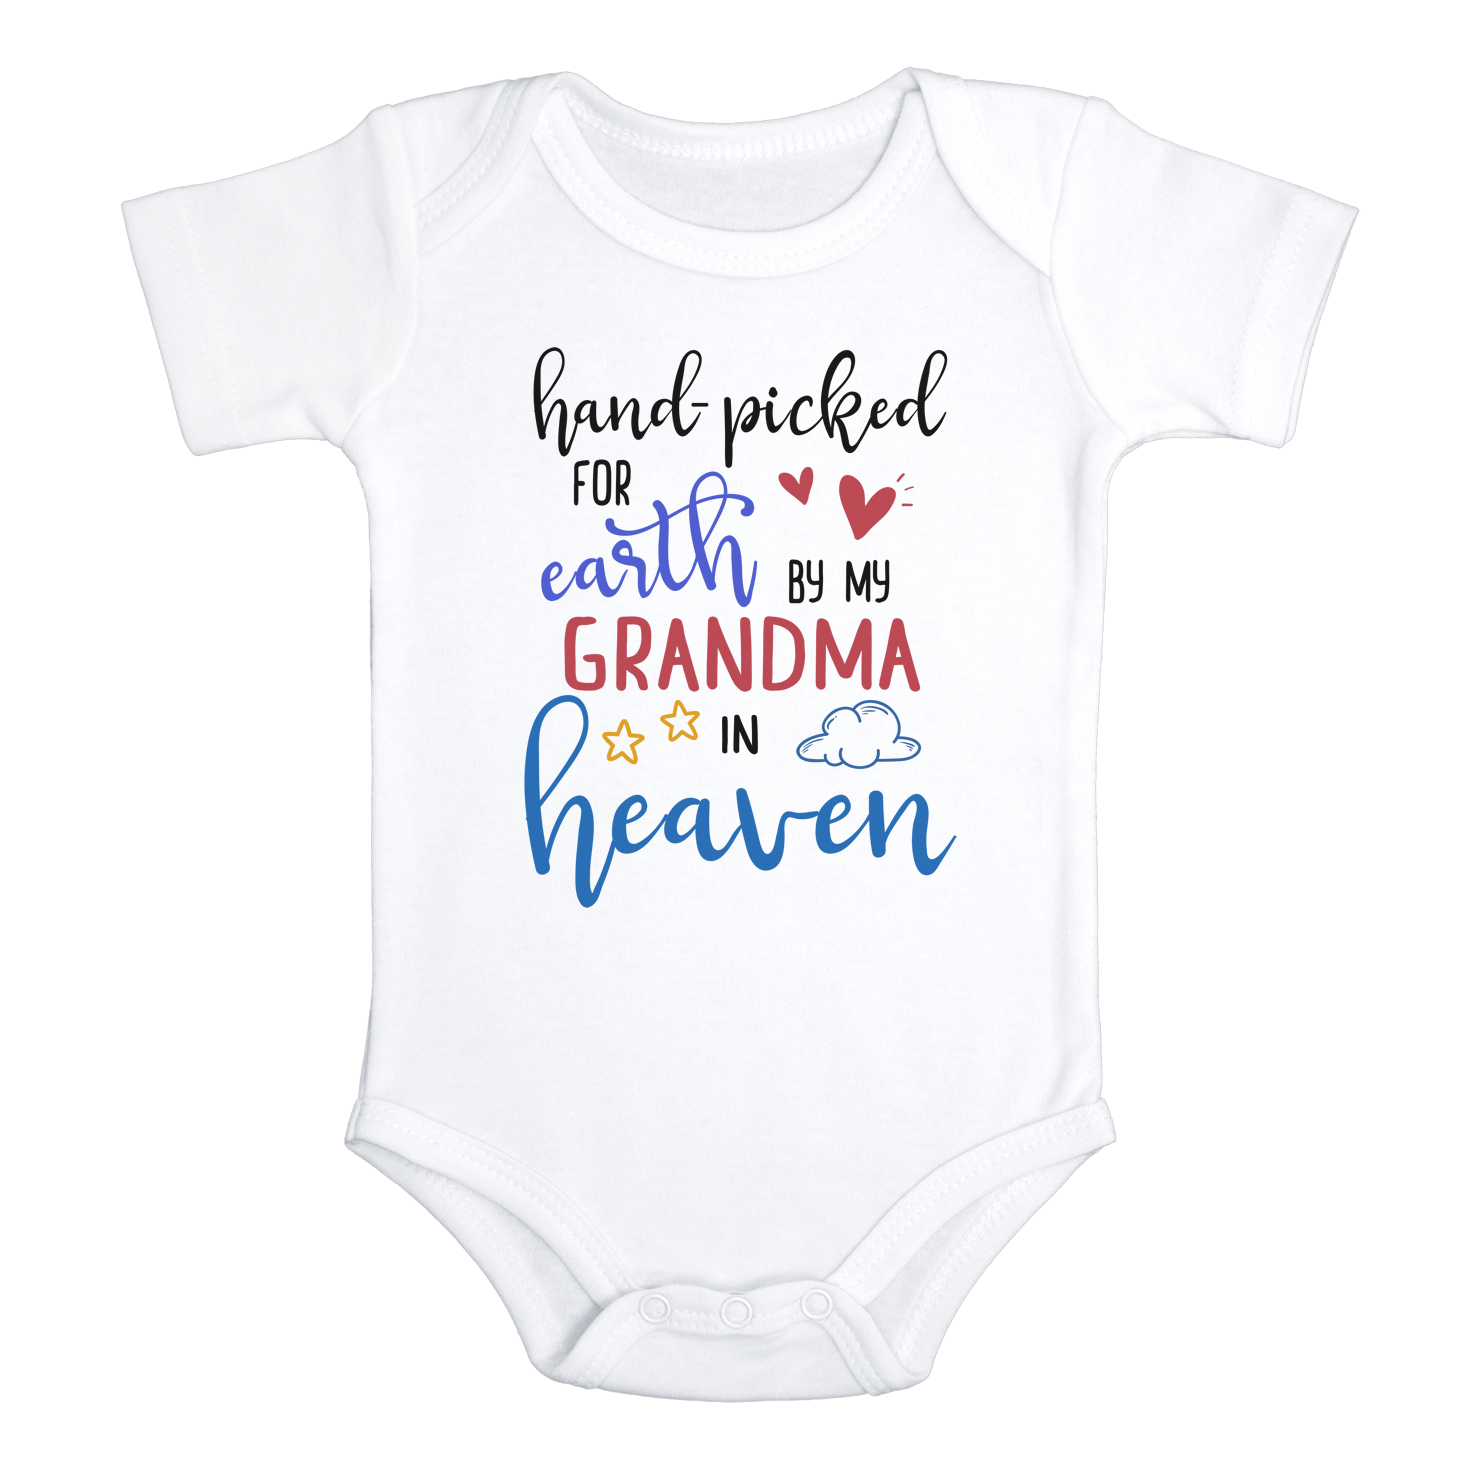 HAND-PICKED FOR EARTH BY MY GRANDMA IN HEAVEN baby onesies bodysuit (white: short or long sleeve) - HappyAddition